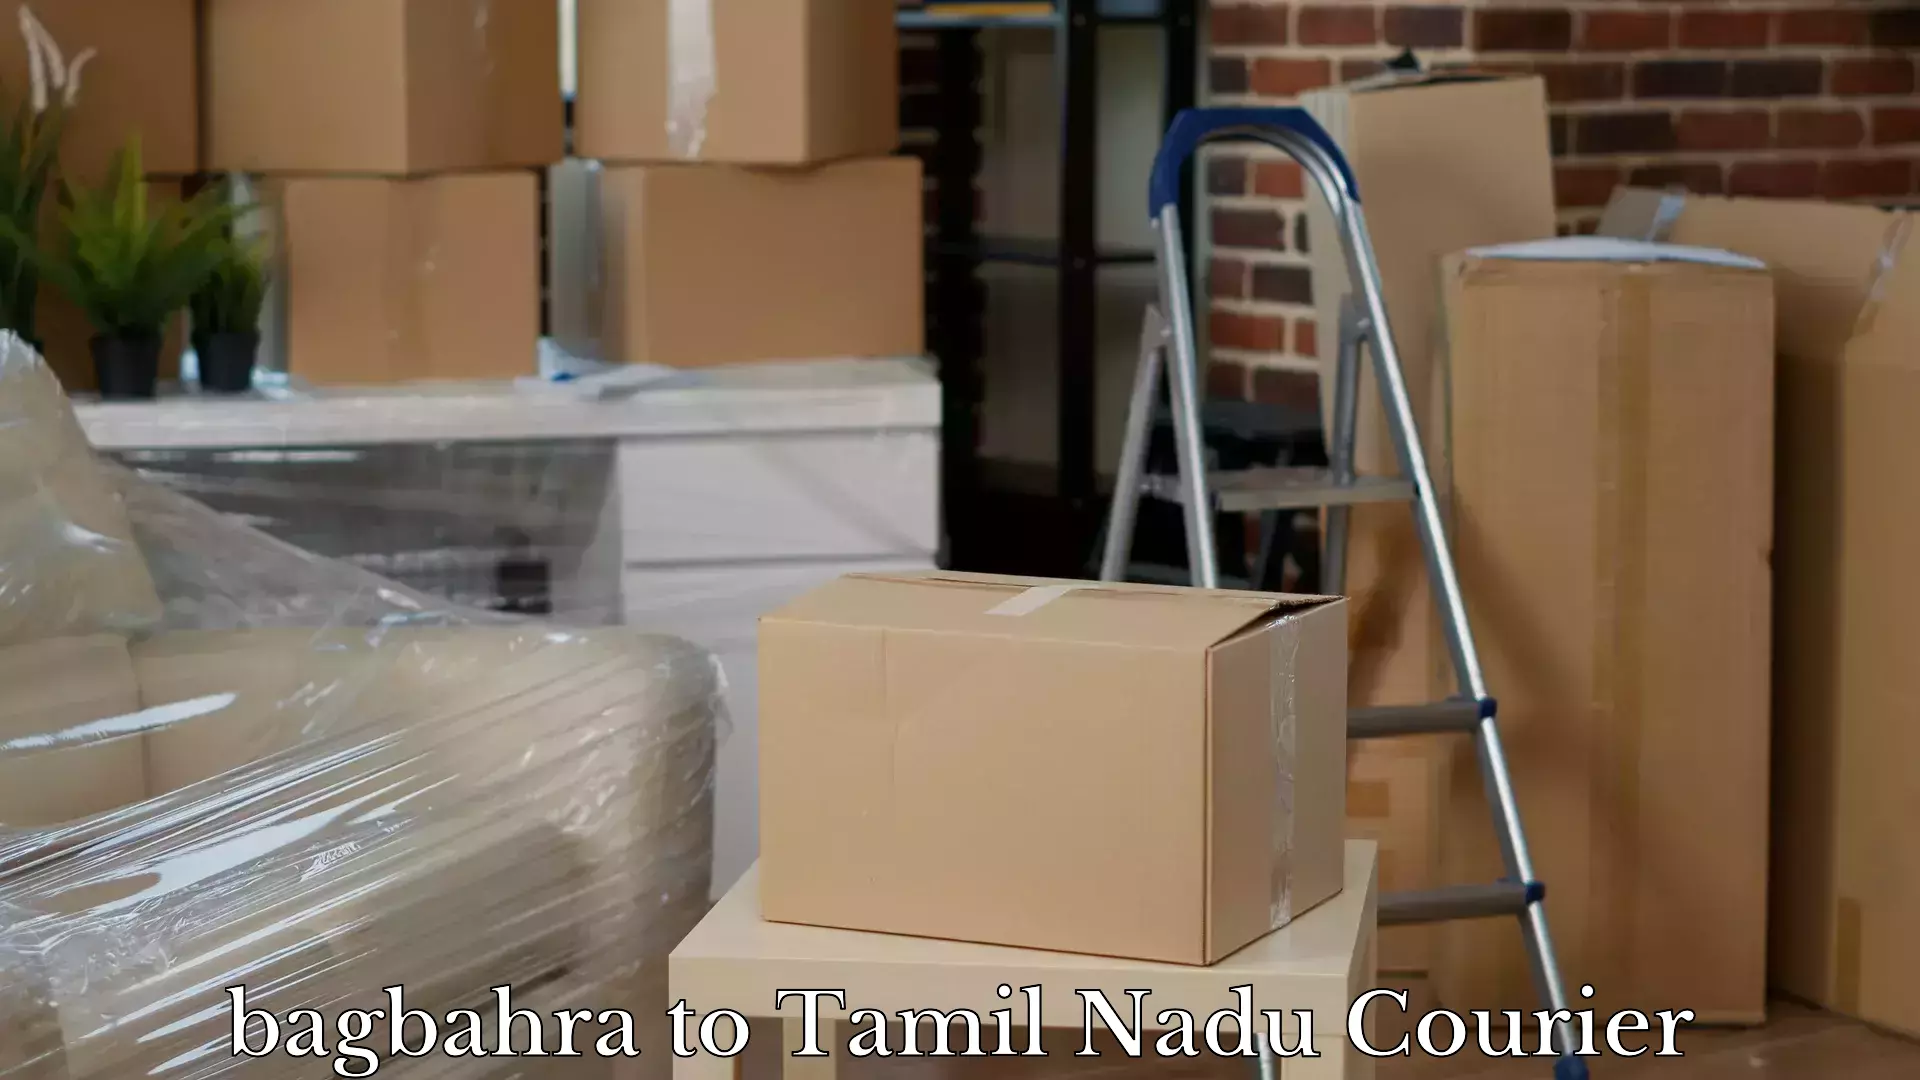 Luggage shipping planner in bagbahra to Tamil Nadu